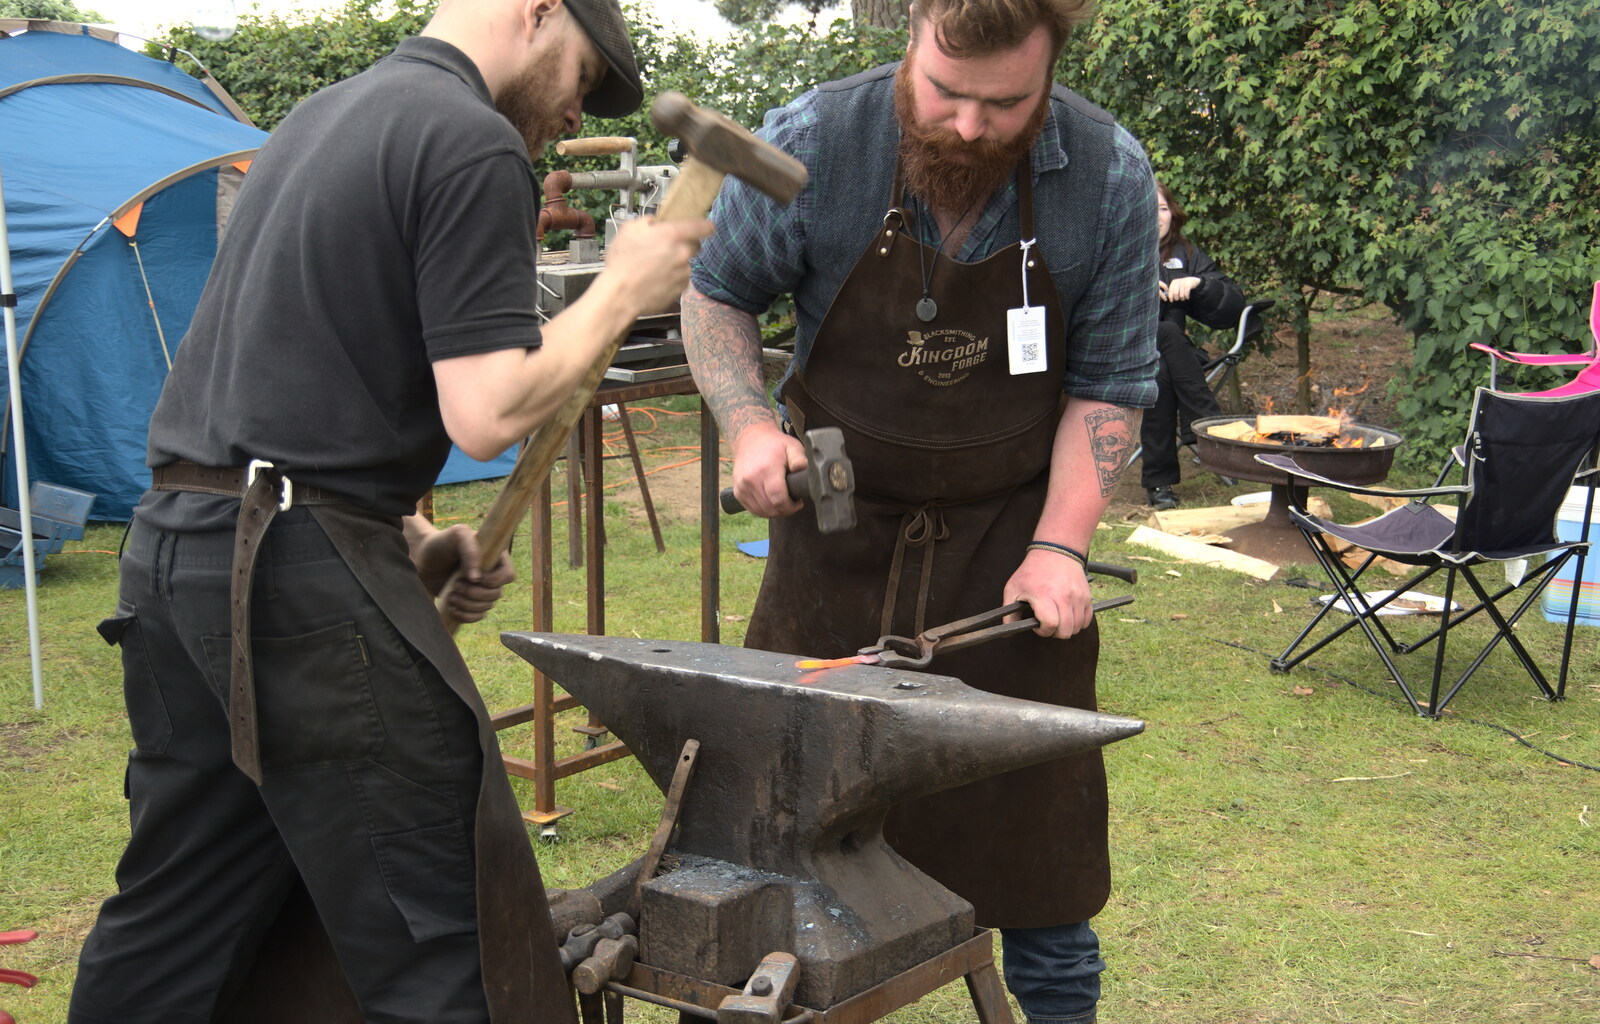 The Suffolk Show, Trinity Park, Ipswich - 1st June 2022: There's an interesting blacksmithing display